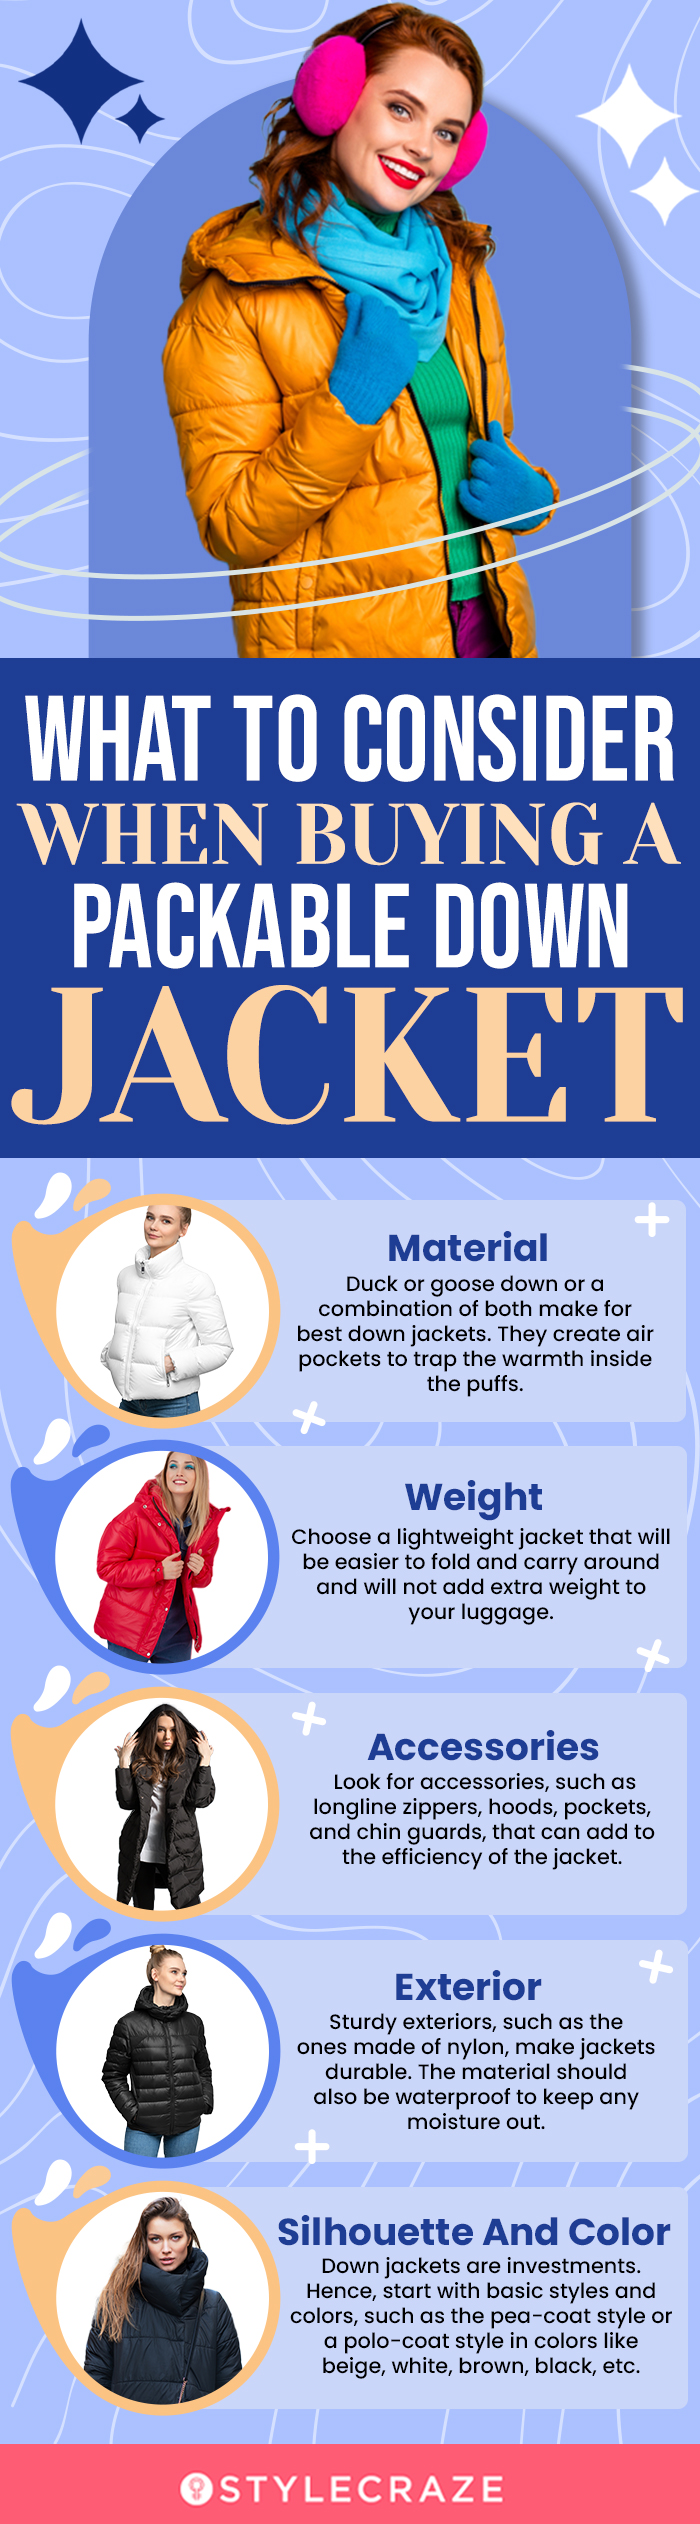 What To Consider When Buying A Packable Down Jacket (infographic)